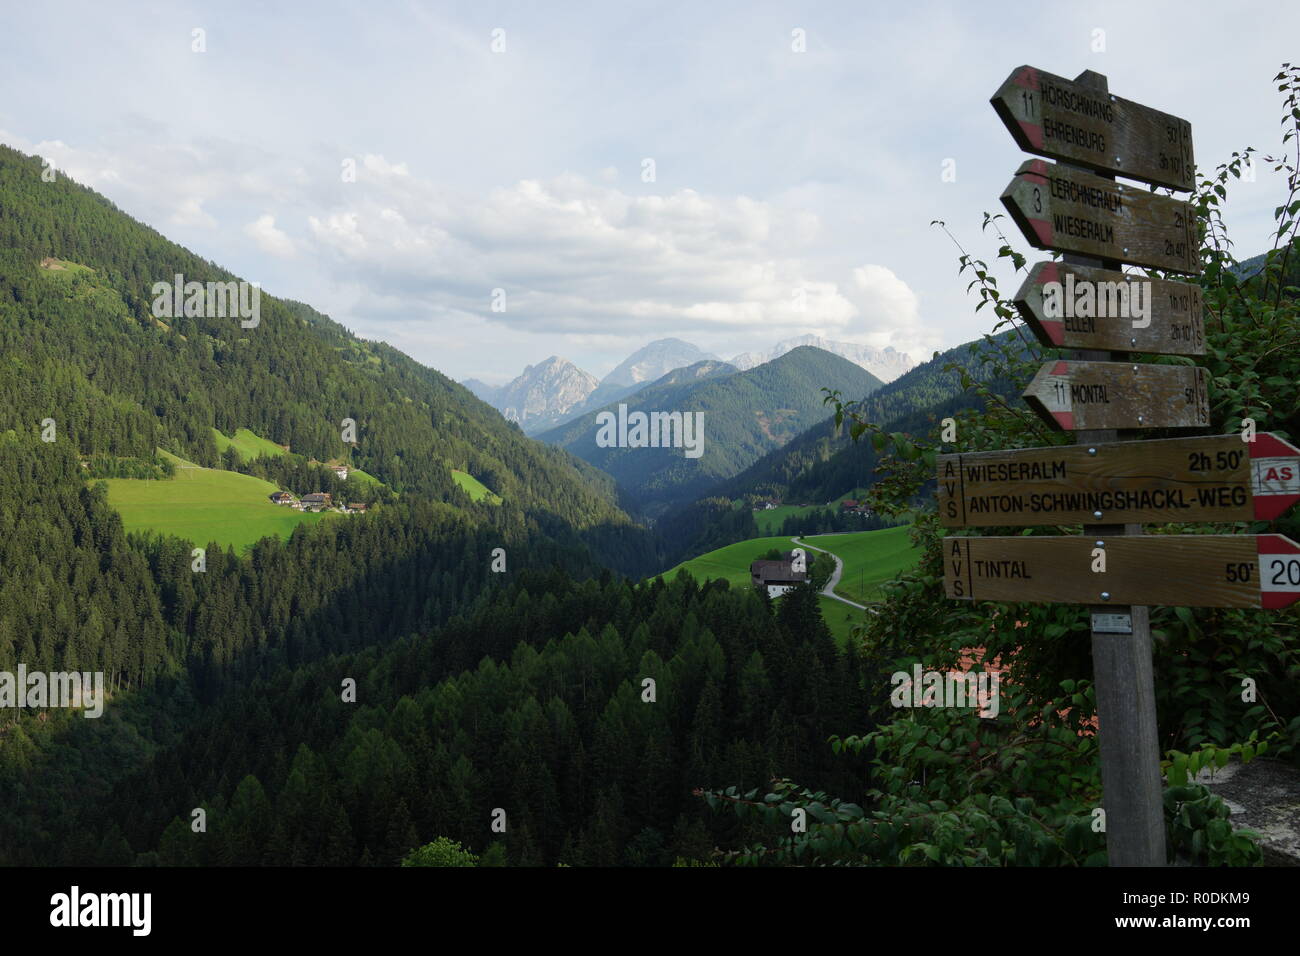 Signposts in front of an alpine mountain landscape Stock Photo